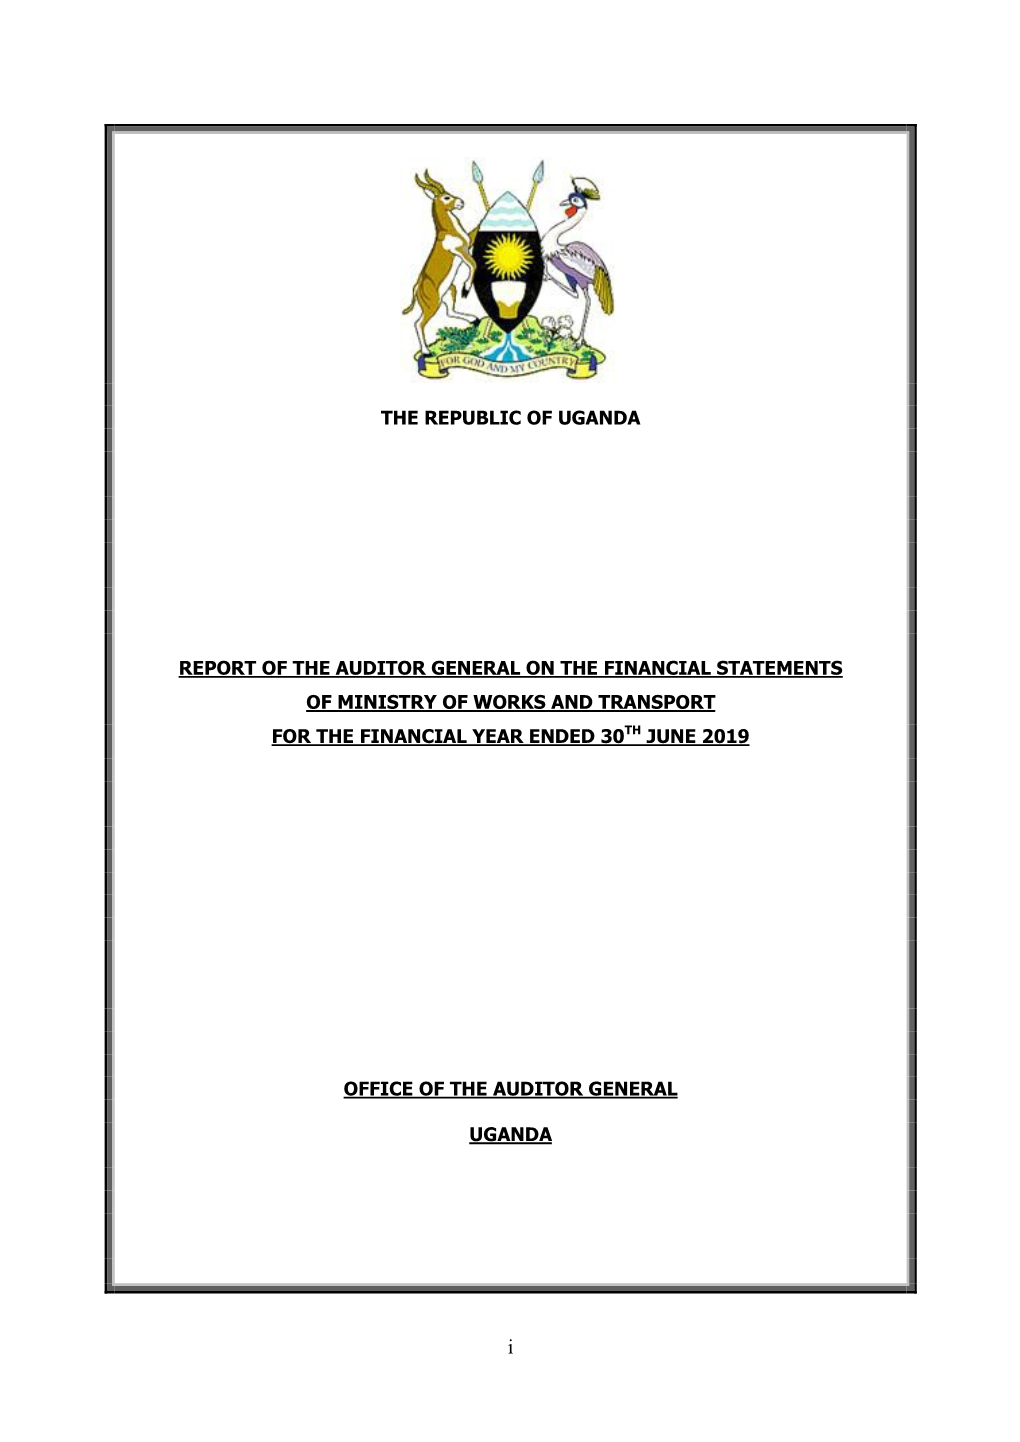 The Republic of Uganda Report of the Auditor General on the Financial Statements of Ministry of Works and Transport for the Fi